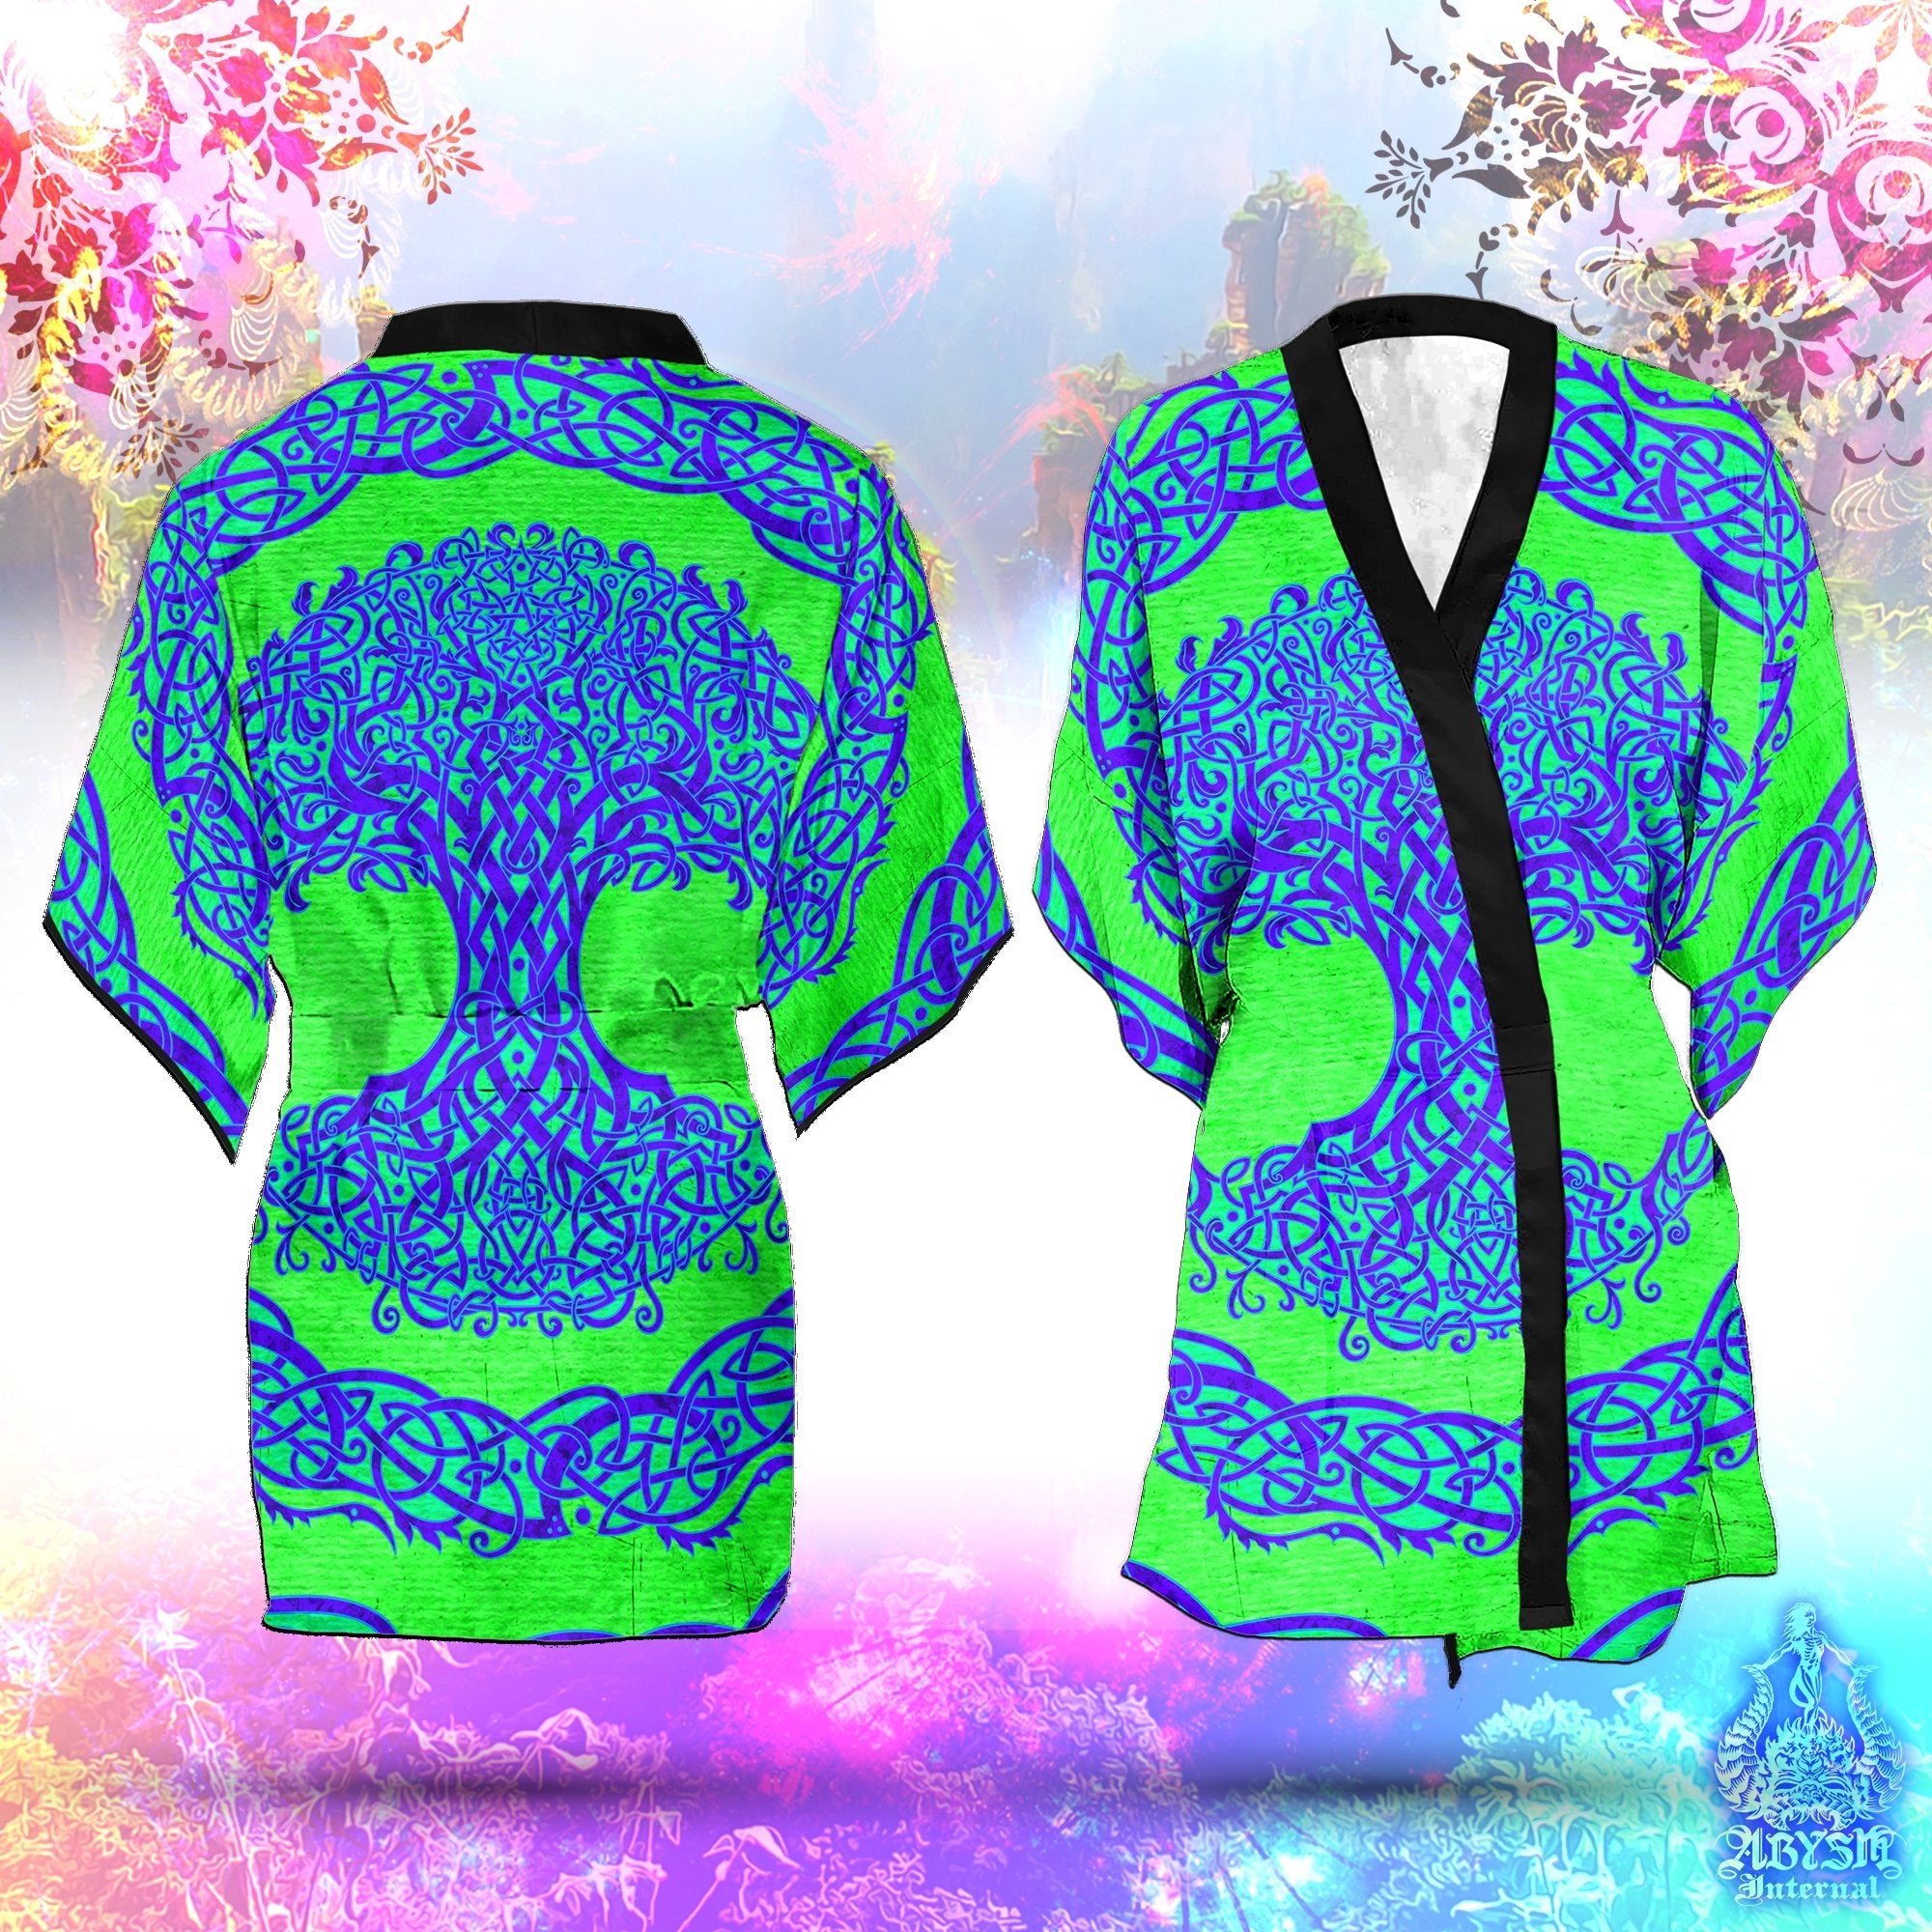 Tree of Life Cover Up, Beach Outfit, Celtic Party Kimono, Wicca Summer Festival Robe, Witchy Indie and Alternative Clothing, Unisex - Psy - Abysm Internal